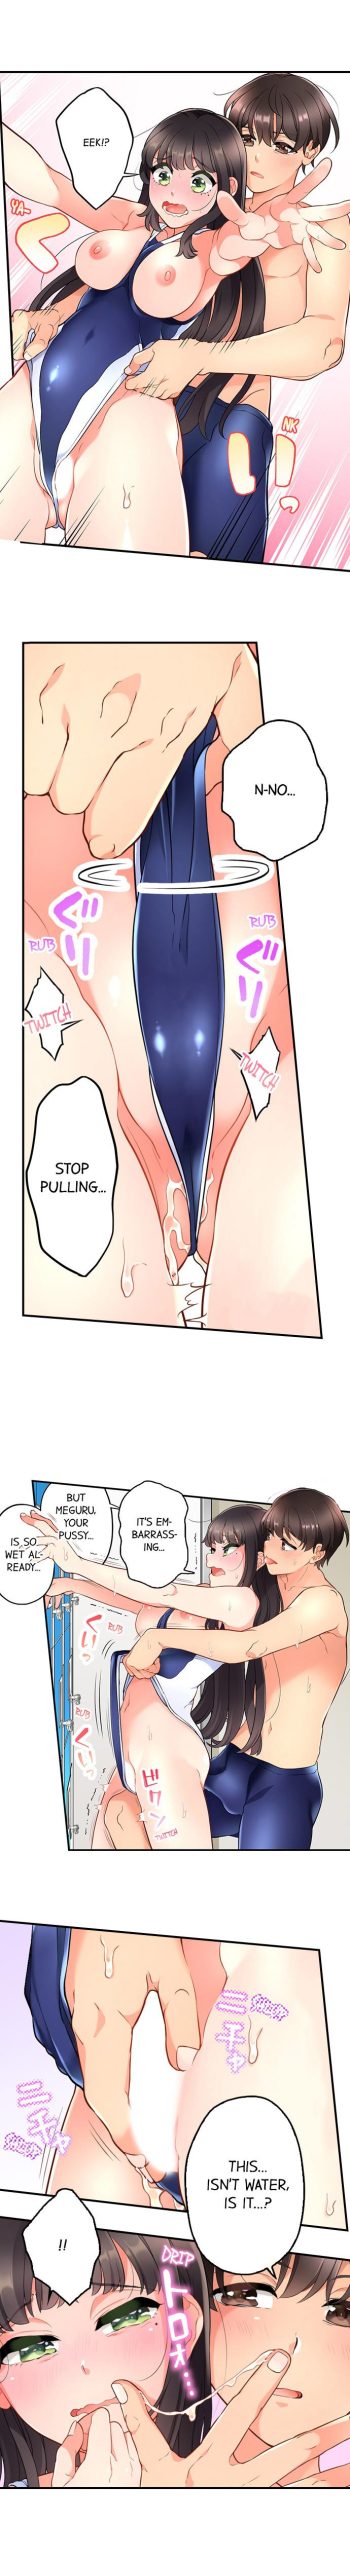 My Friend Came Back From The Future To Fuck Me (Chapter 7-14) porn comic picture 58